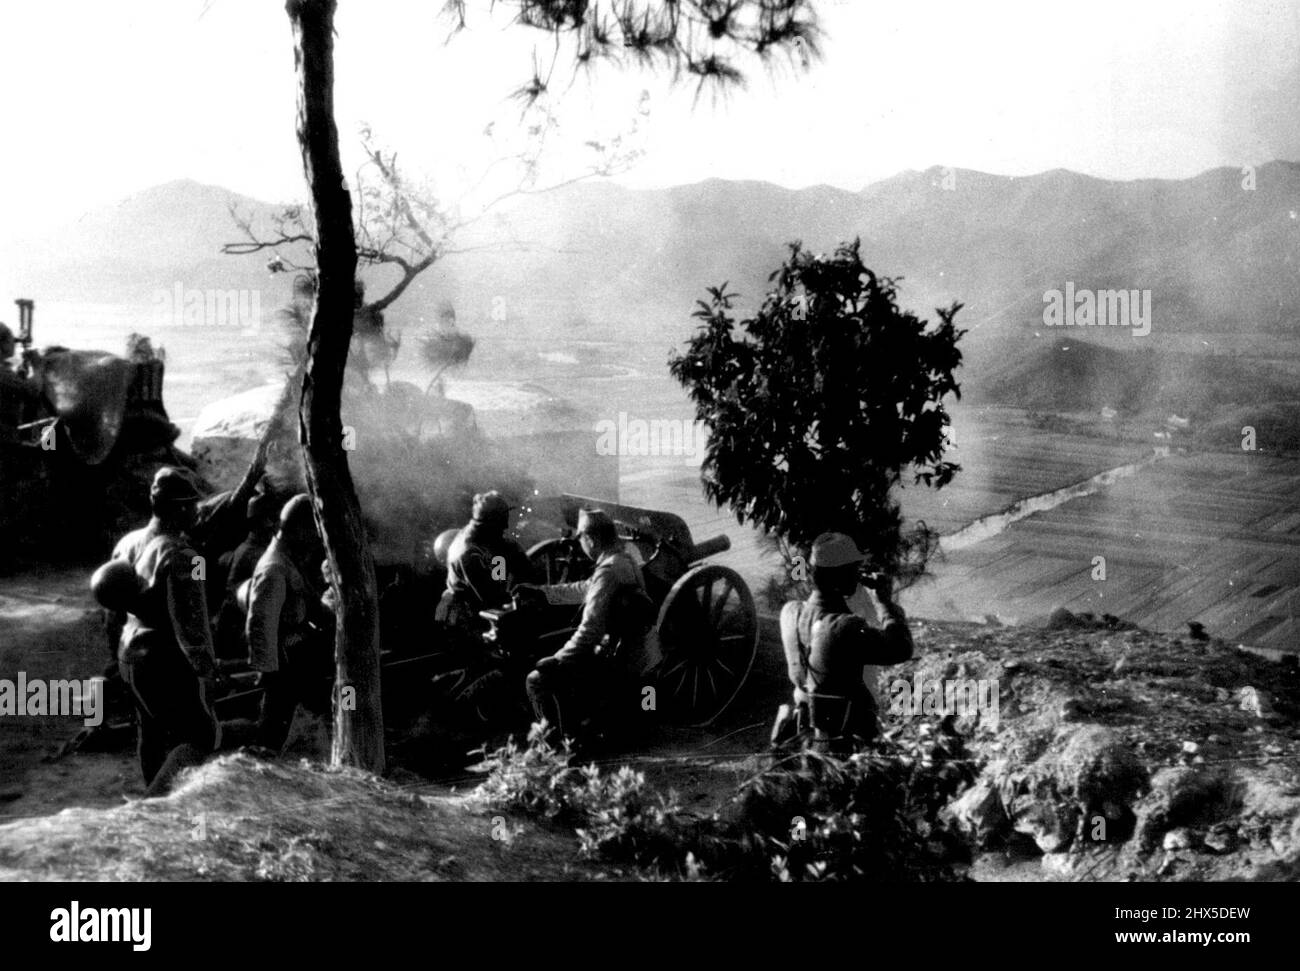 China Front... Japanese Gun Crops.... Active firing upon the enemy at Hsiaoshna, Chekiang Province, one of the most vital points of the Chiang Kai-shek's army, took a place by an unnamed gun unit of the Japanese troops. April 18, 1941. (Photo by The Domei News Photos Service). Stock Photo